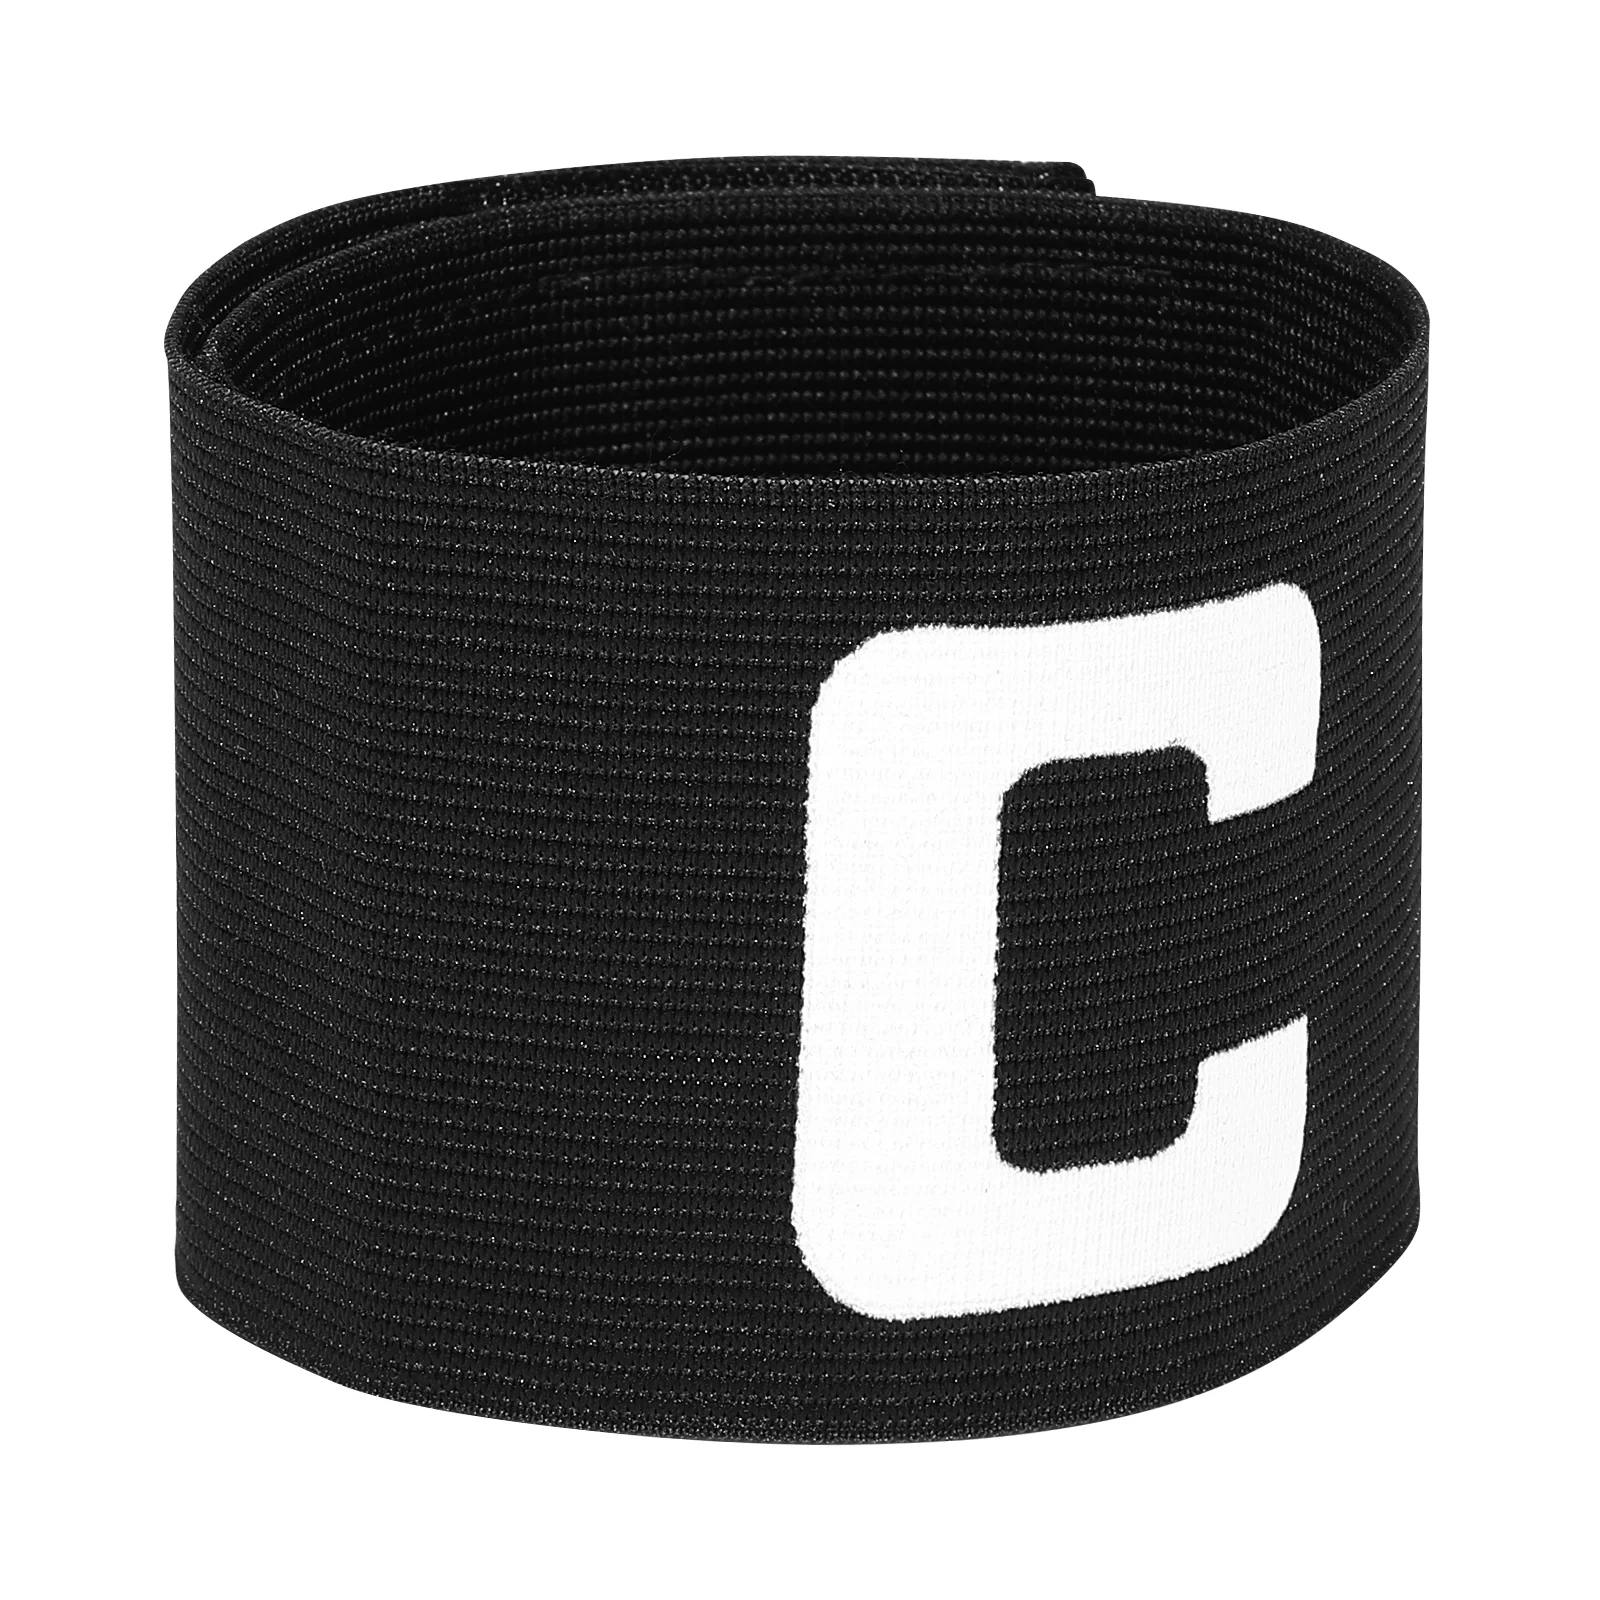 

Captain Armband Soccer Bands Arm Football Adult Captains Youth Armbands Softballadjustable Band Exercise Fitness Accessories